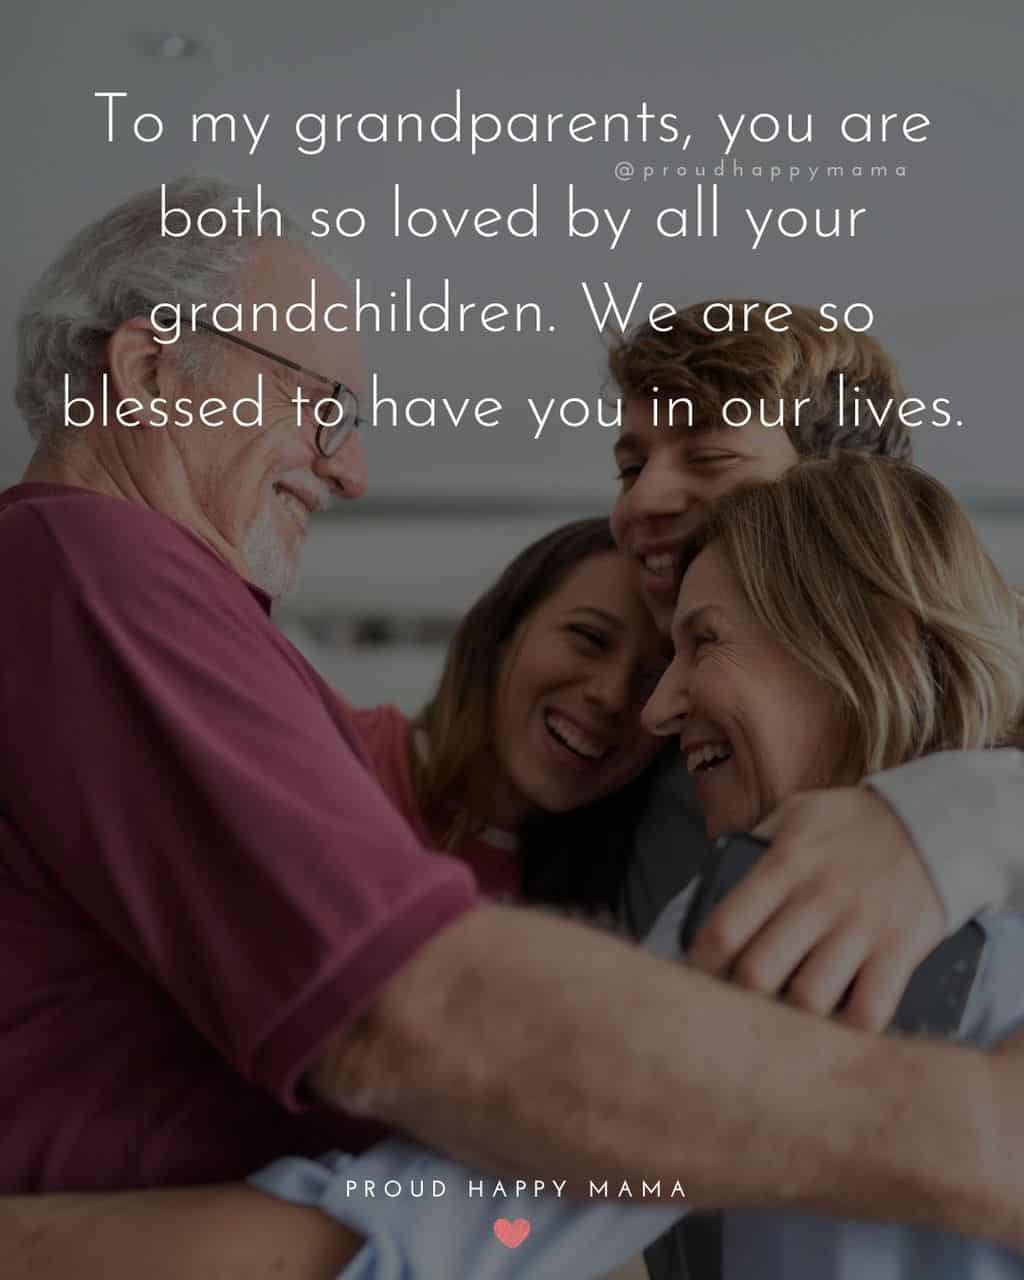 Grandparent Quotes – To my grandparents, you are both so loved by all your grandchildren. We are so blessed to have you in